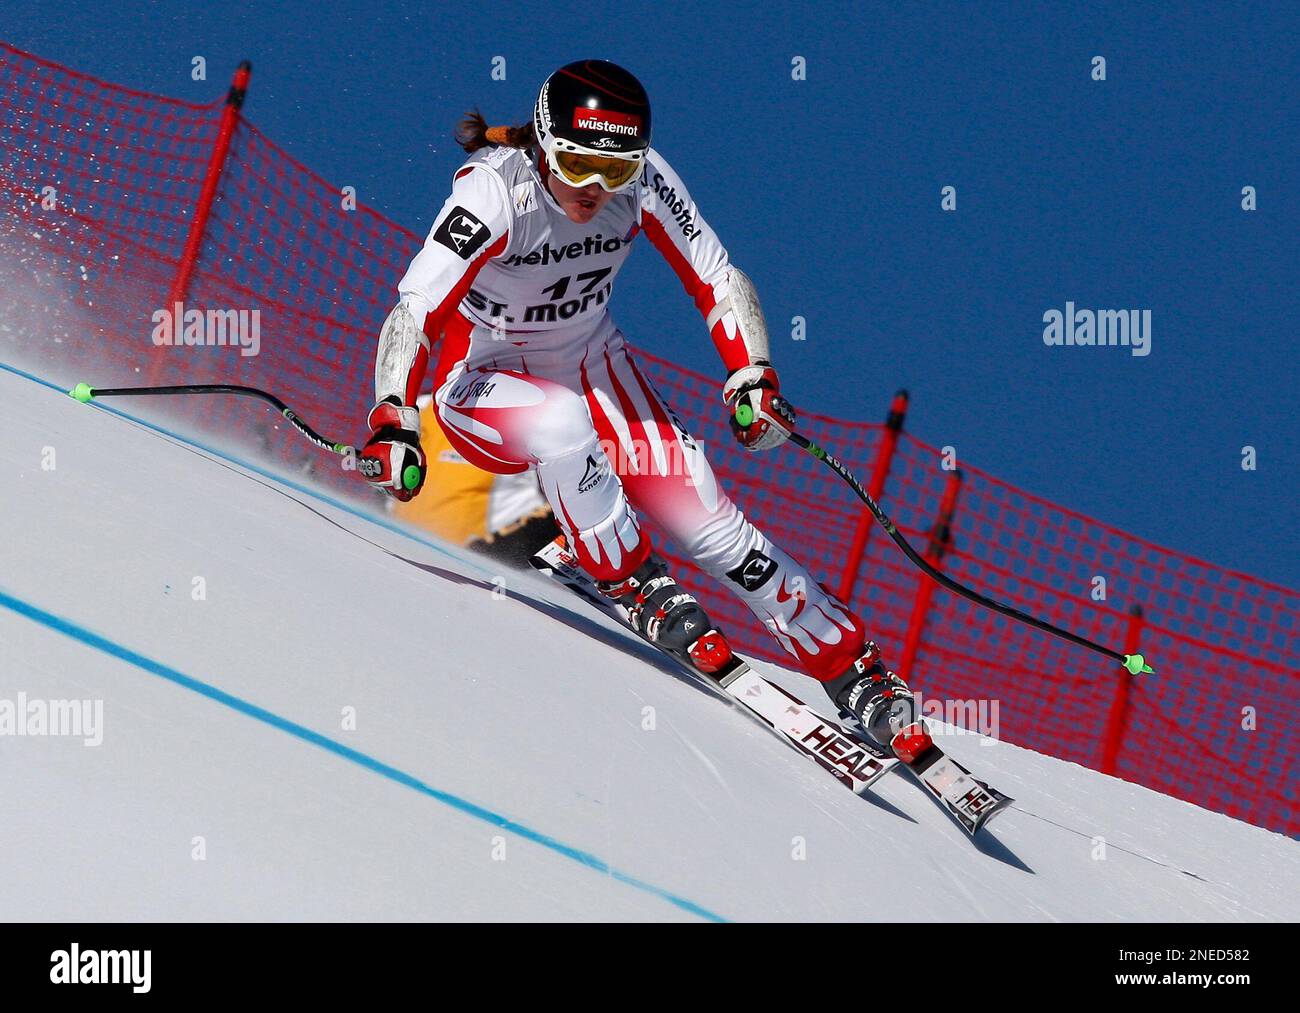 Austrias Elisabeth Goergl speeds down the course on the way to finishing eighth during an Alpine Ski, Womens World Cup Super G race, in St. Moritz, Switzerland, Sunday, Jan